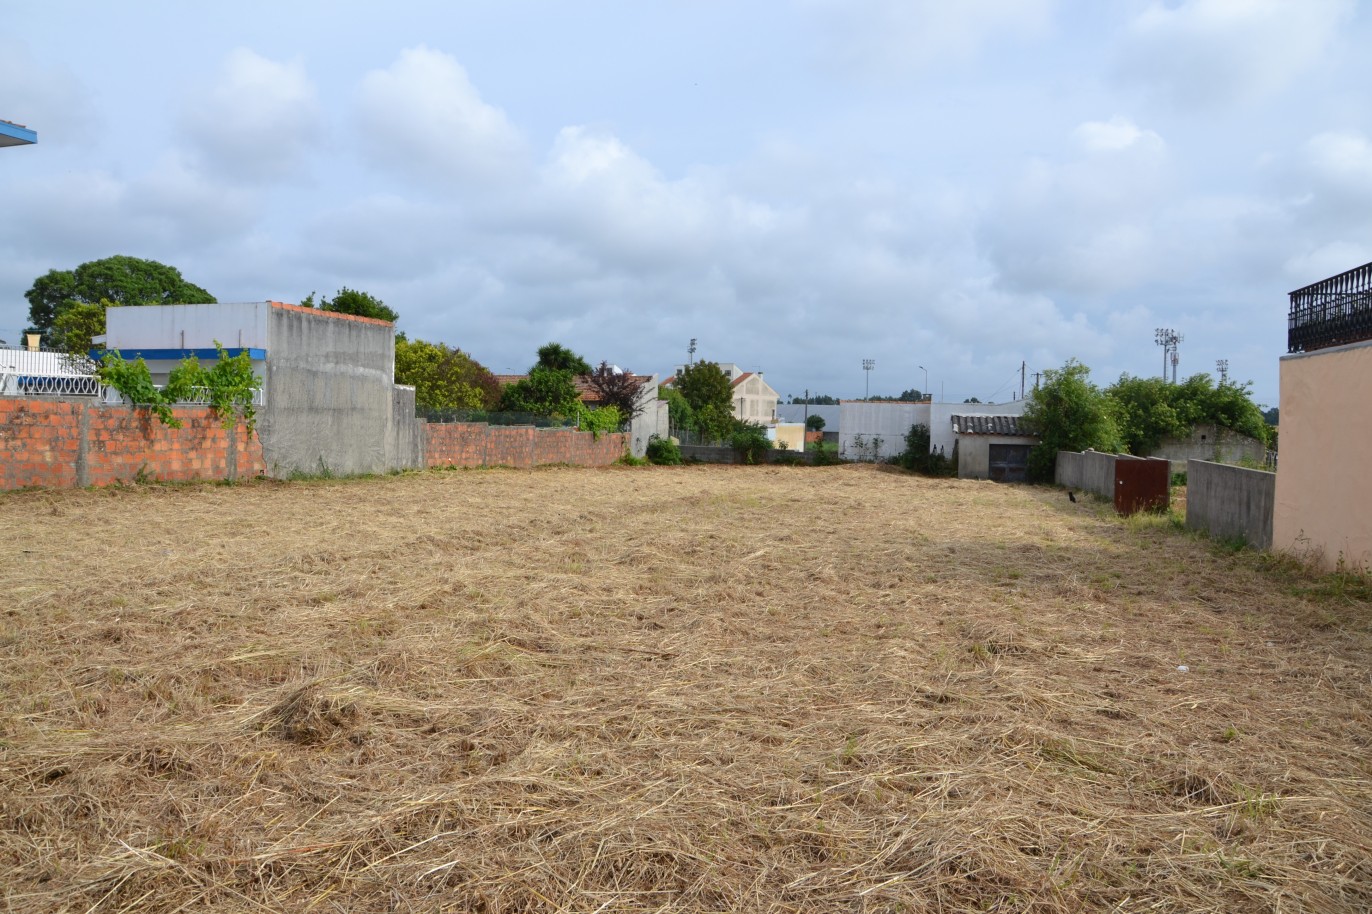 Sale: Land for construction of housing, in Gulpilhares, V. N. Gaia, Portugal_227593